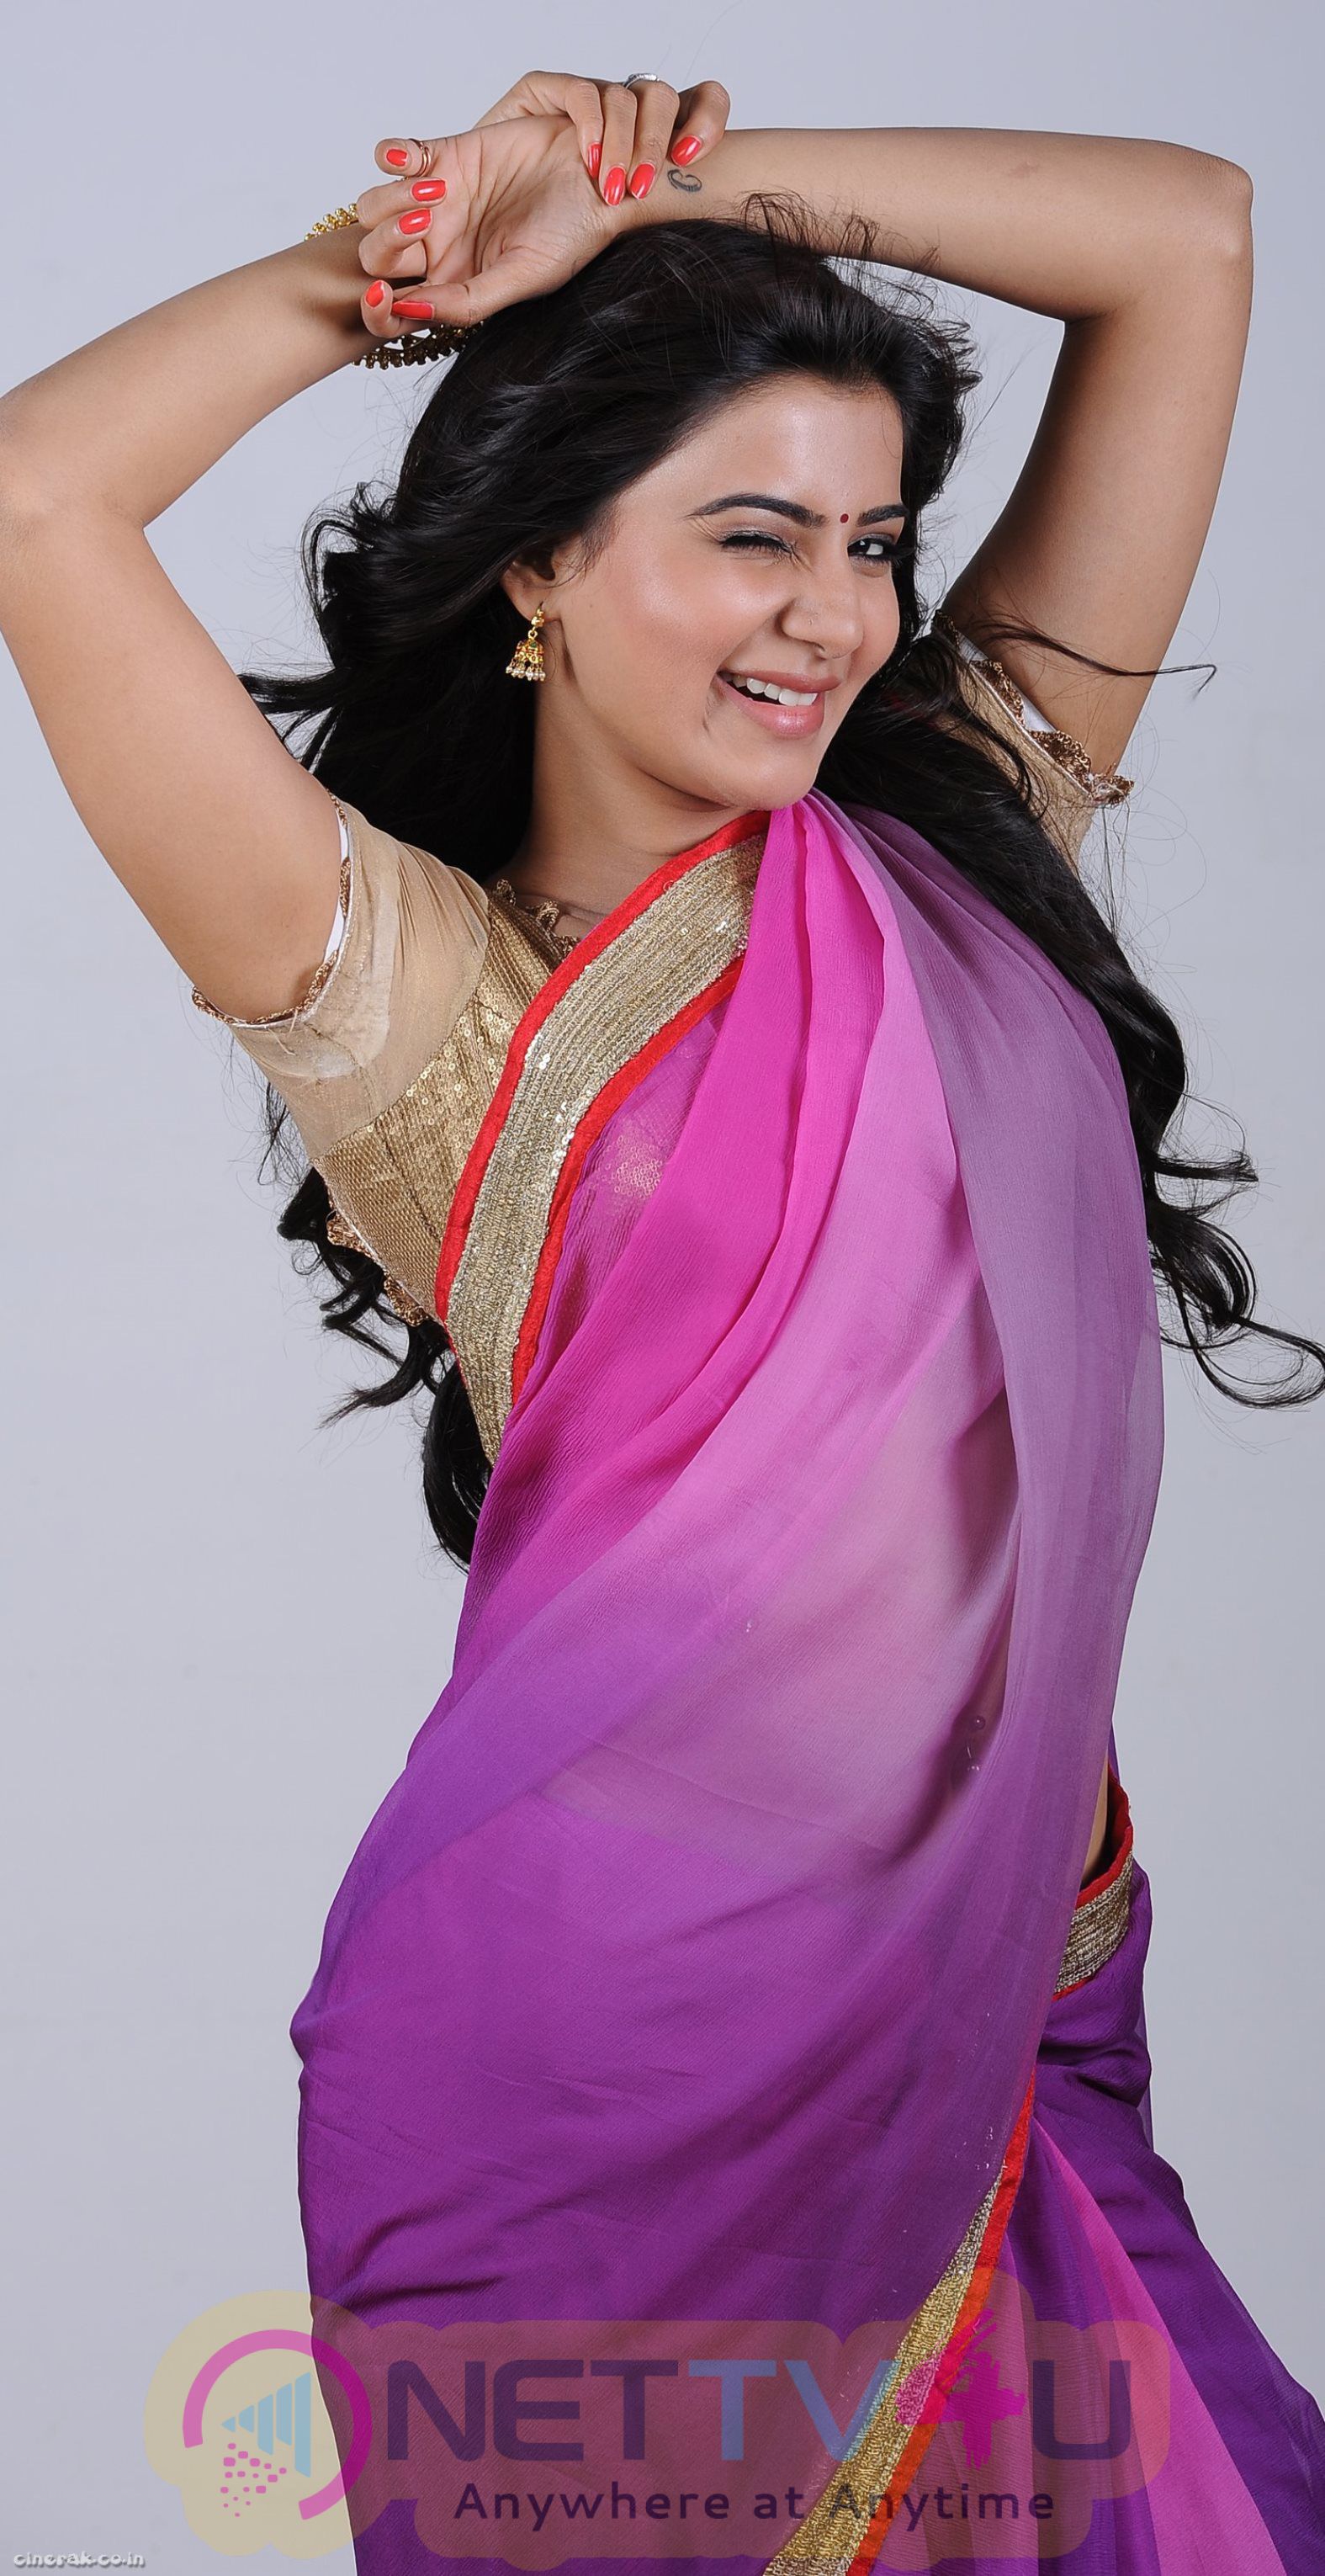 Actress In Saree Hot  Good Looking Images Tamil Gallery